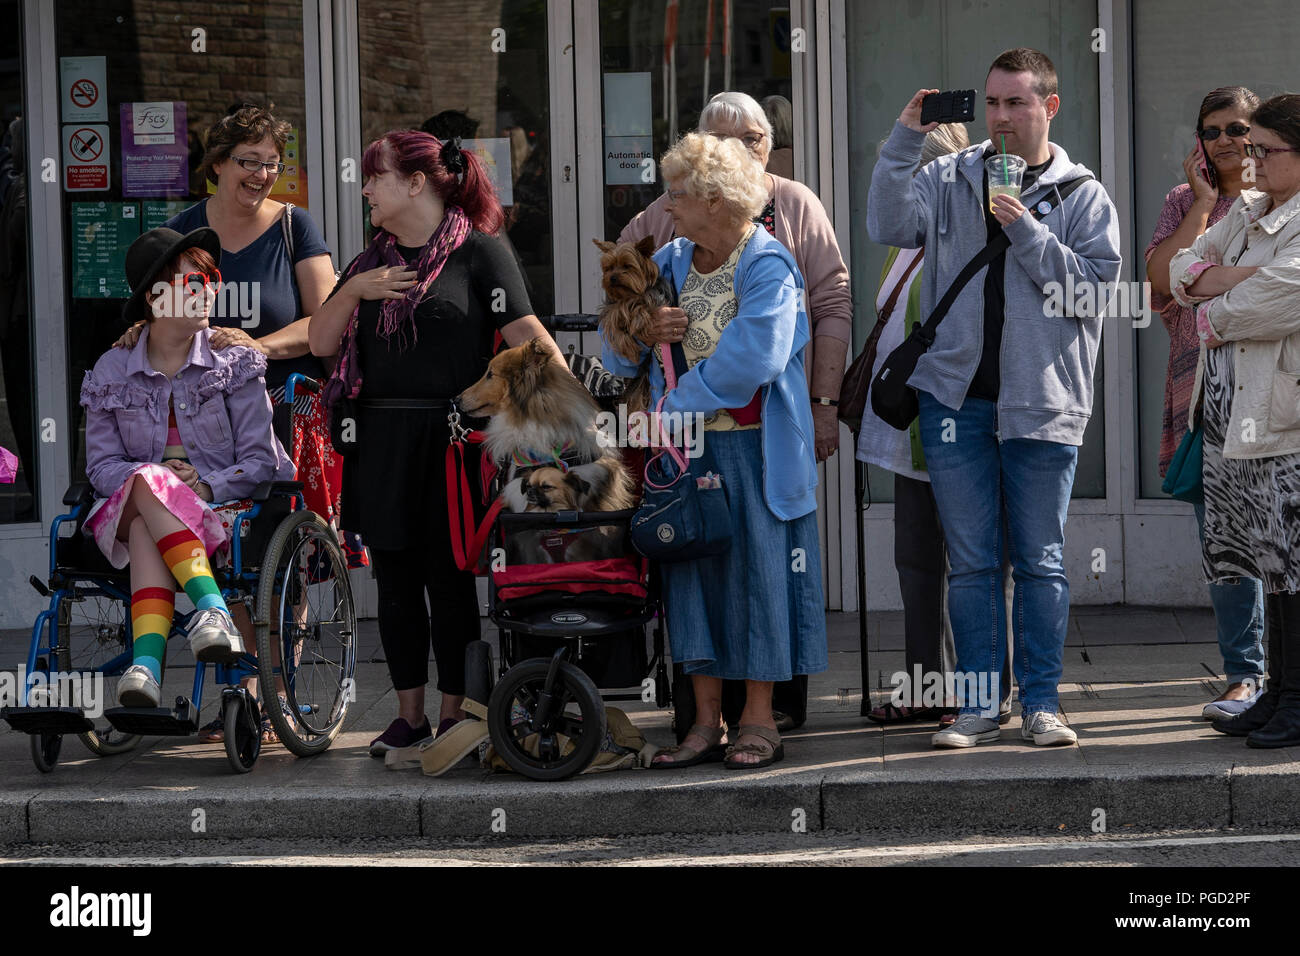 Cardiff, Wales, August 25, 2018:Spectators participate at the  Annual Pride Cymru Parade  in Cardiff, Wales on August 25, 2018 ©Daniel Damaschin Credit: Daniel Damaschin/Alamy Live News Stock Photo